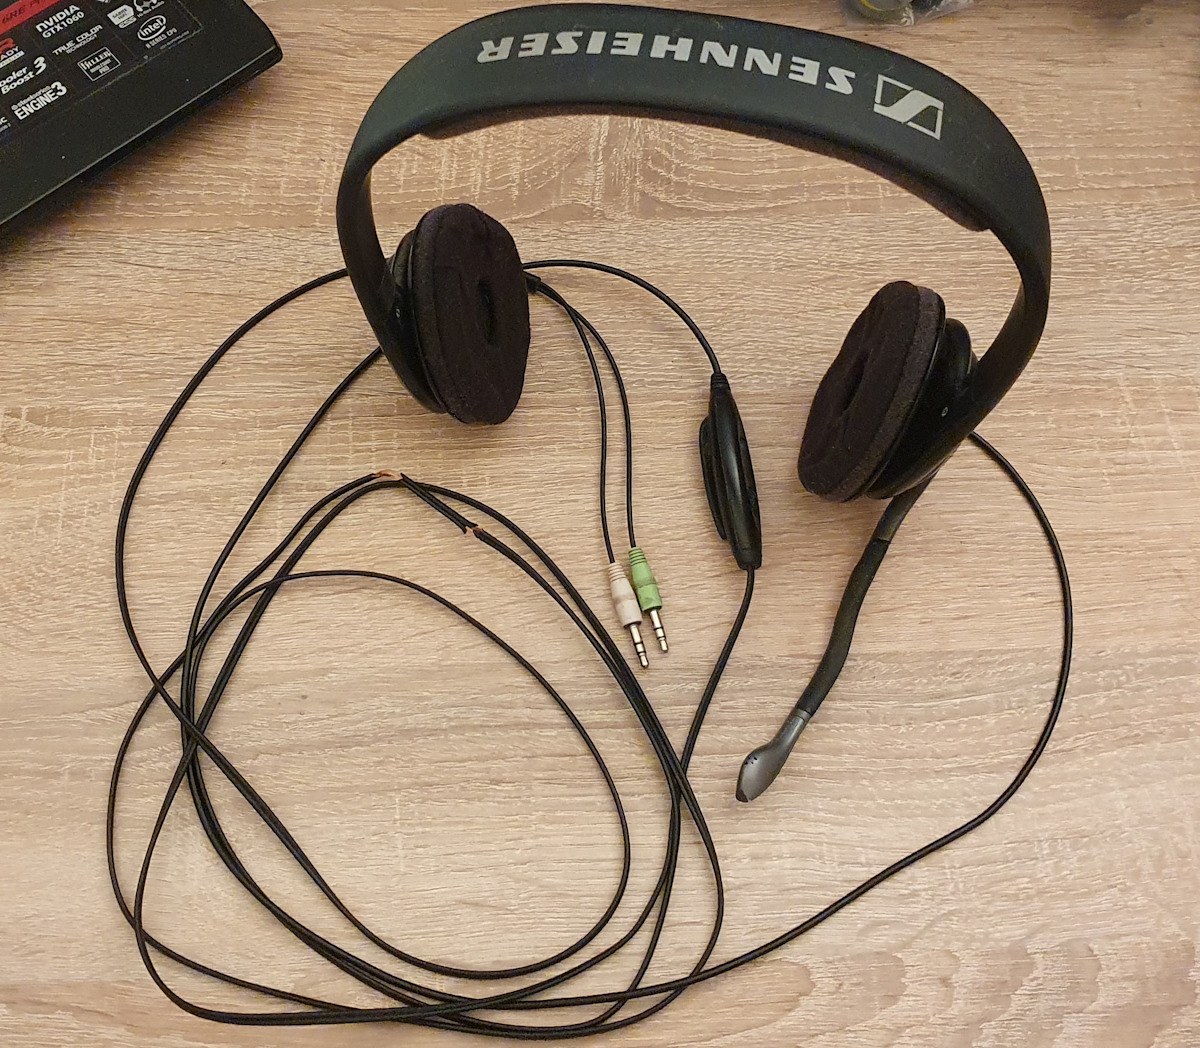 My Sennheiser PC150 on my wooden desk, half-broken cables and all